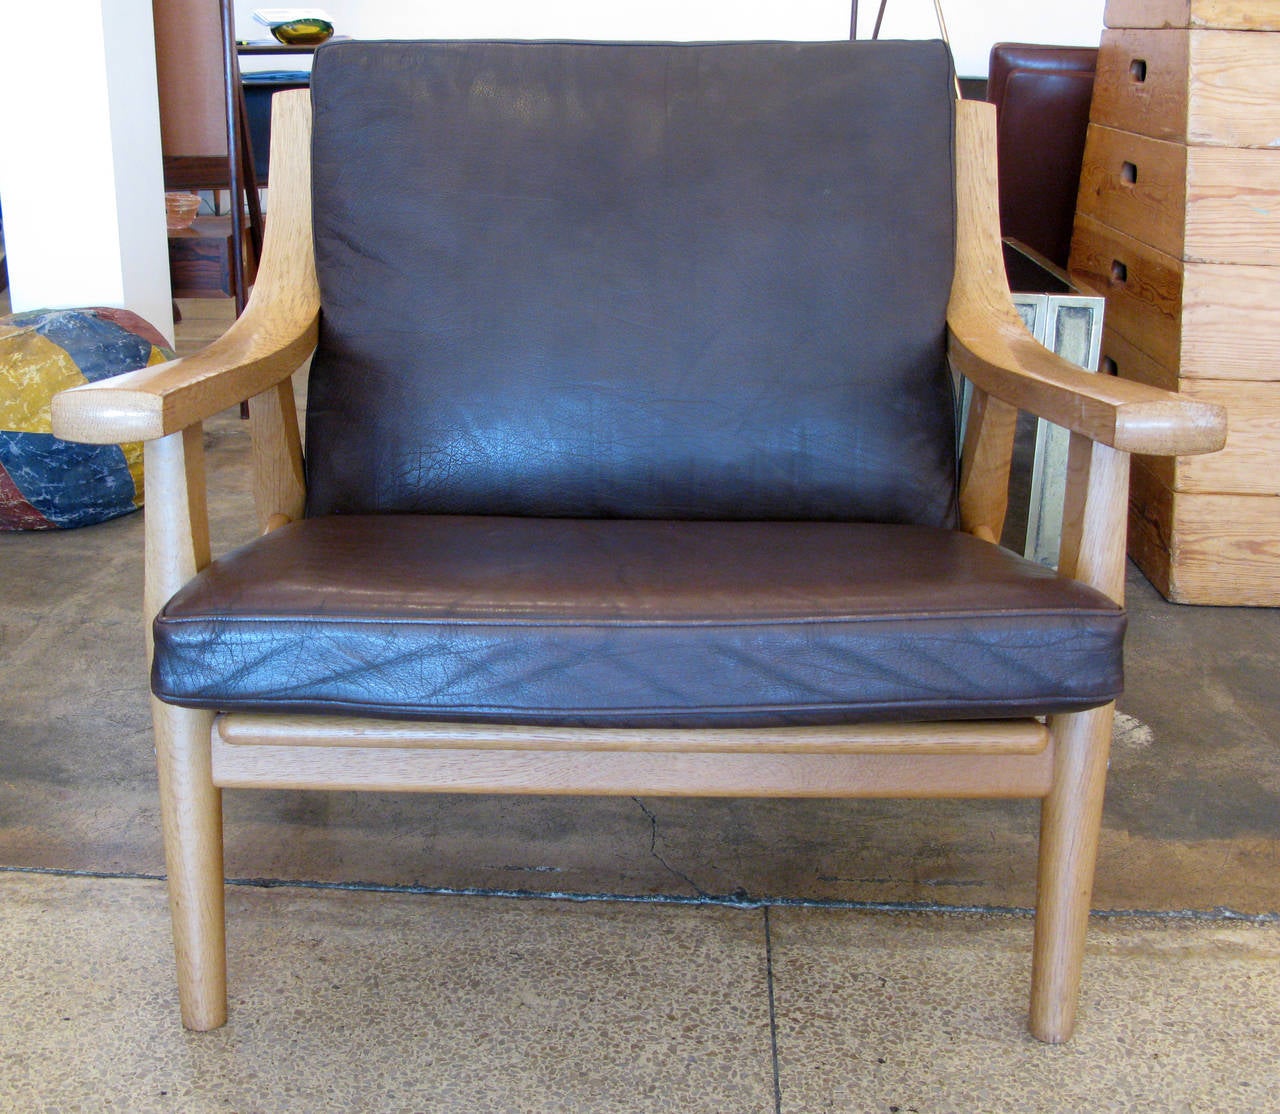 Pair of armchairs by Hans J. Wegner.  Oak frame with loose cushions upholstered in aged chocolate brown leather. Manufactured Getama, model GE-530.  Designed in 1973.  Seat height: 16